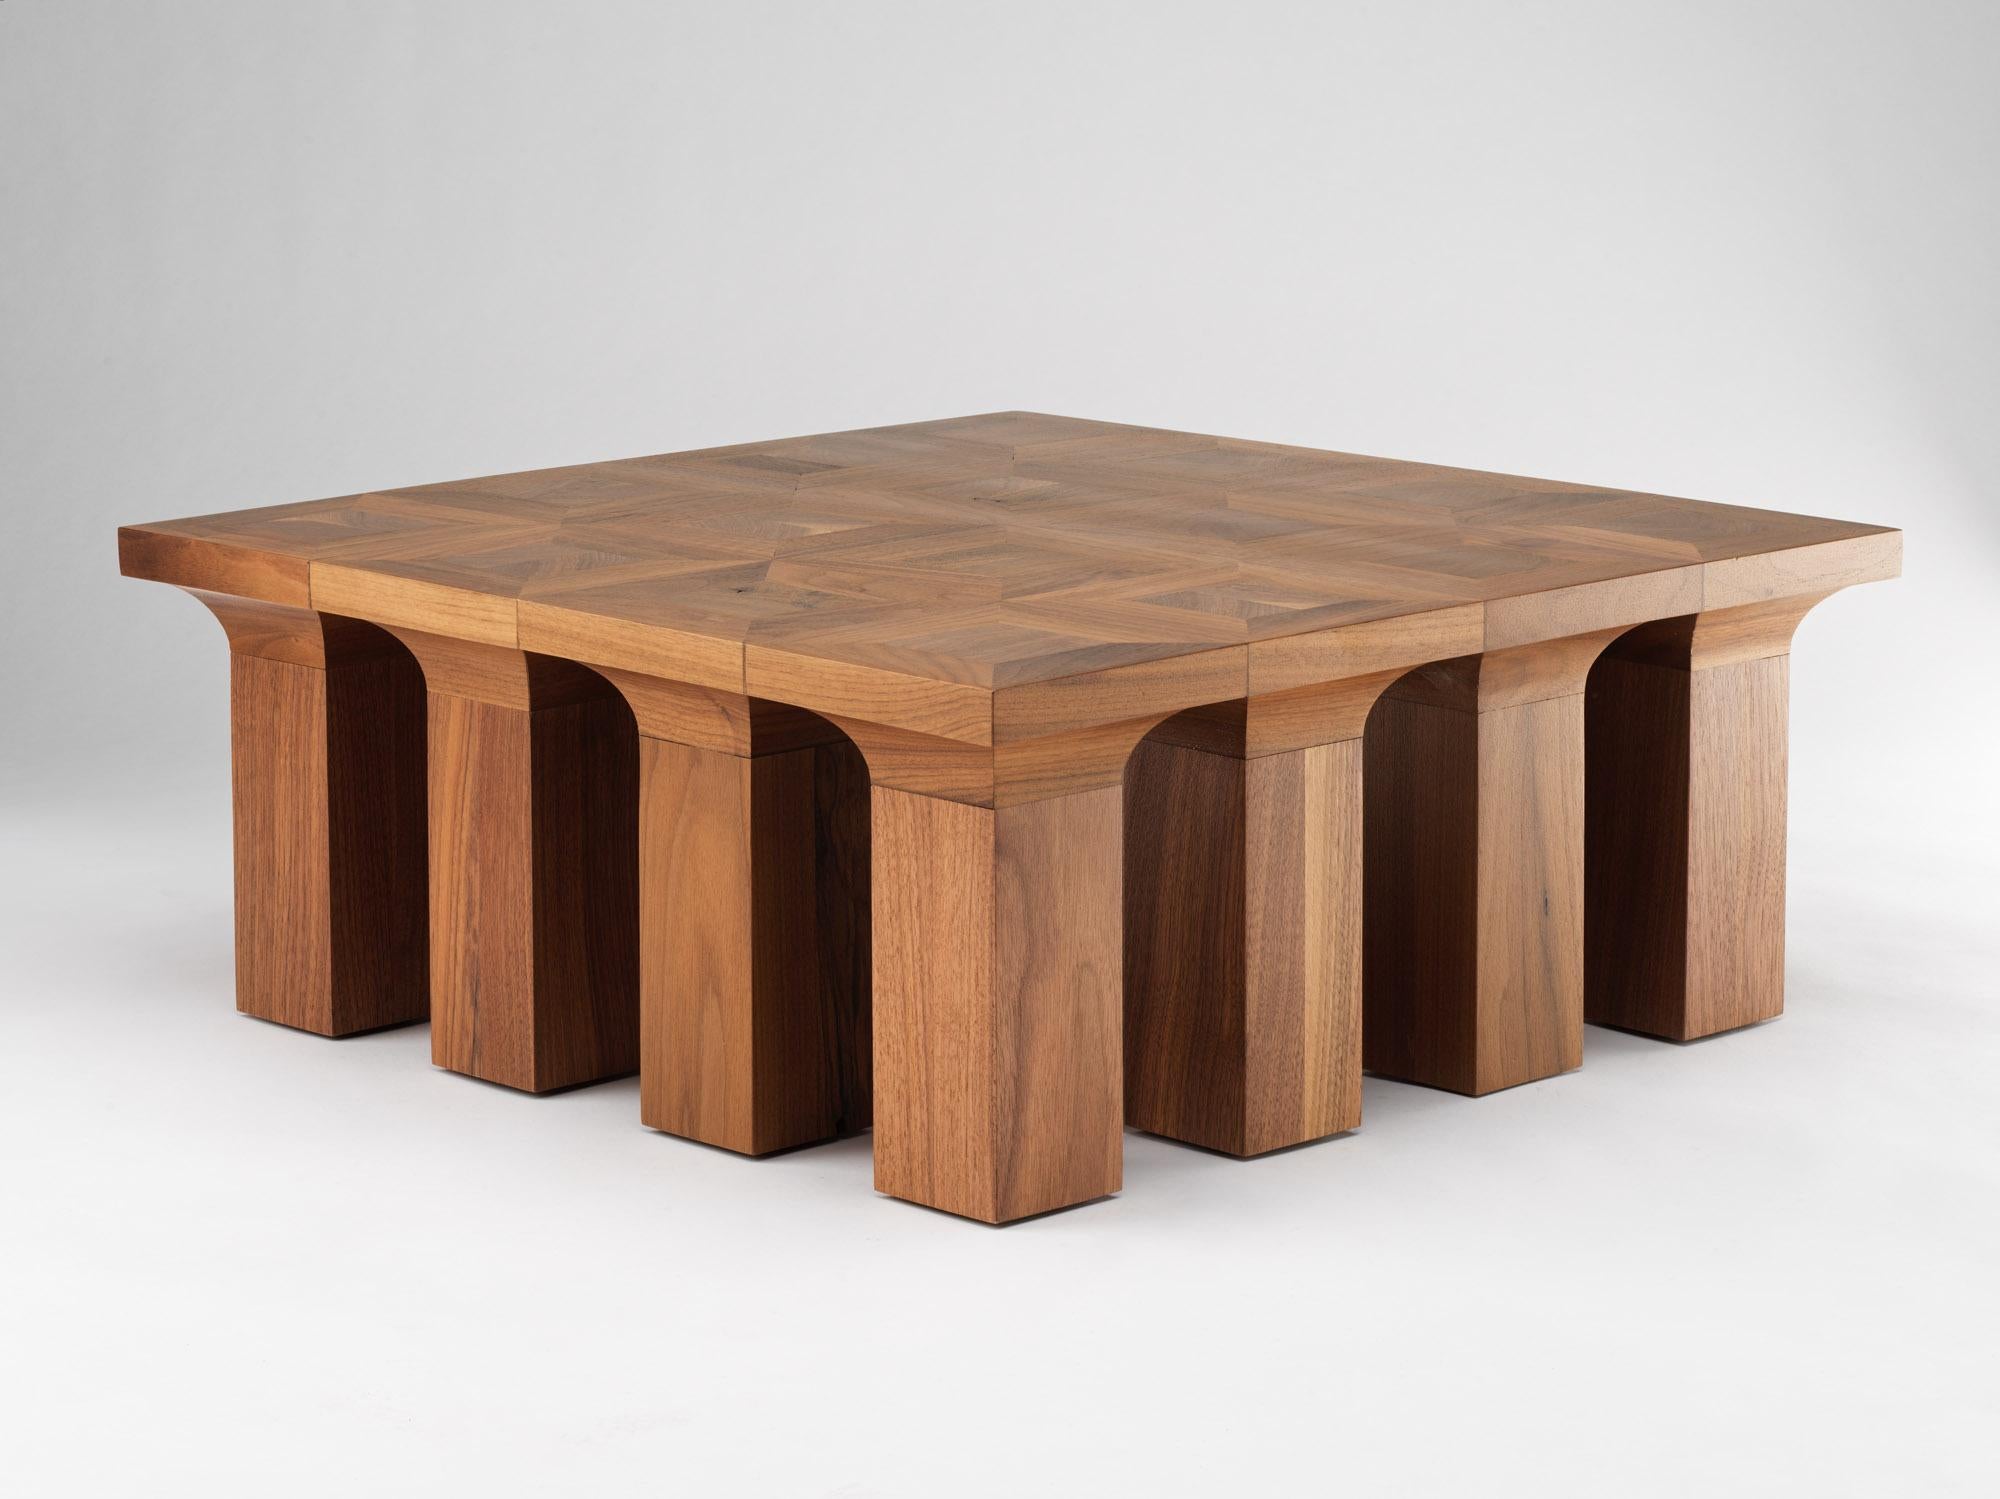 Arcus Coffee Table 60 by Tim Vranken
Limited edition 8 pieces
Materials: American Walnut
Dimensions: 60 x 60 x H 24.5 cm 

Tim Vranken is a Belgian furniture designer who focuses on solid, handmade furniture. Throughout his designs the use of pure